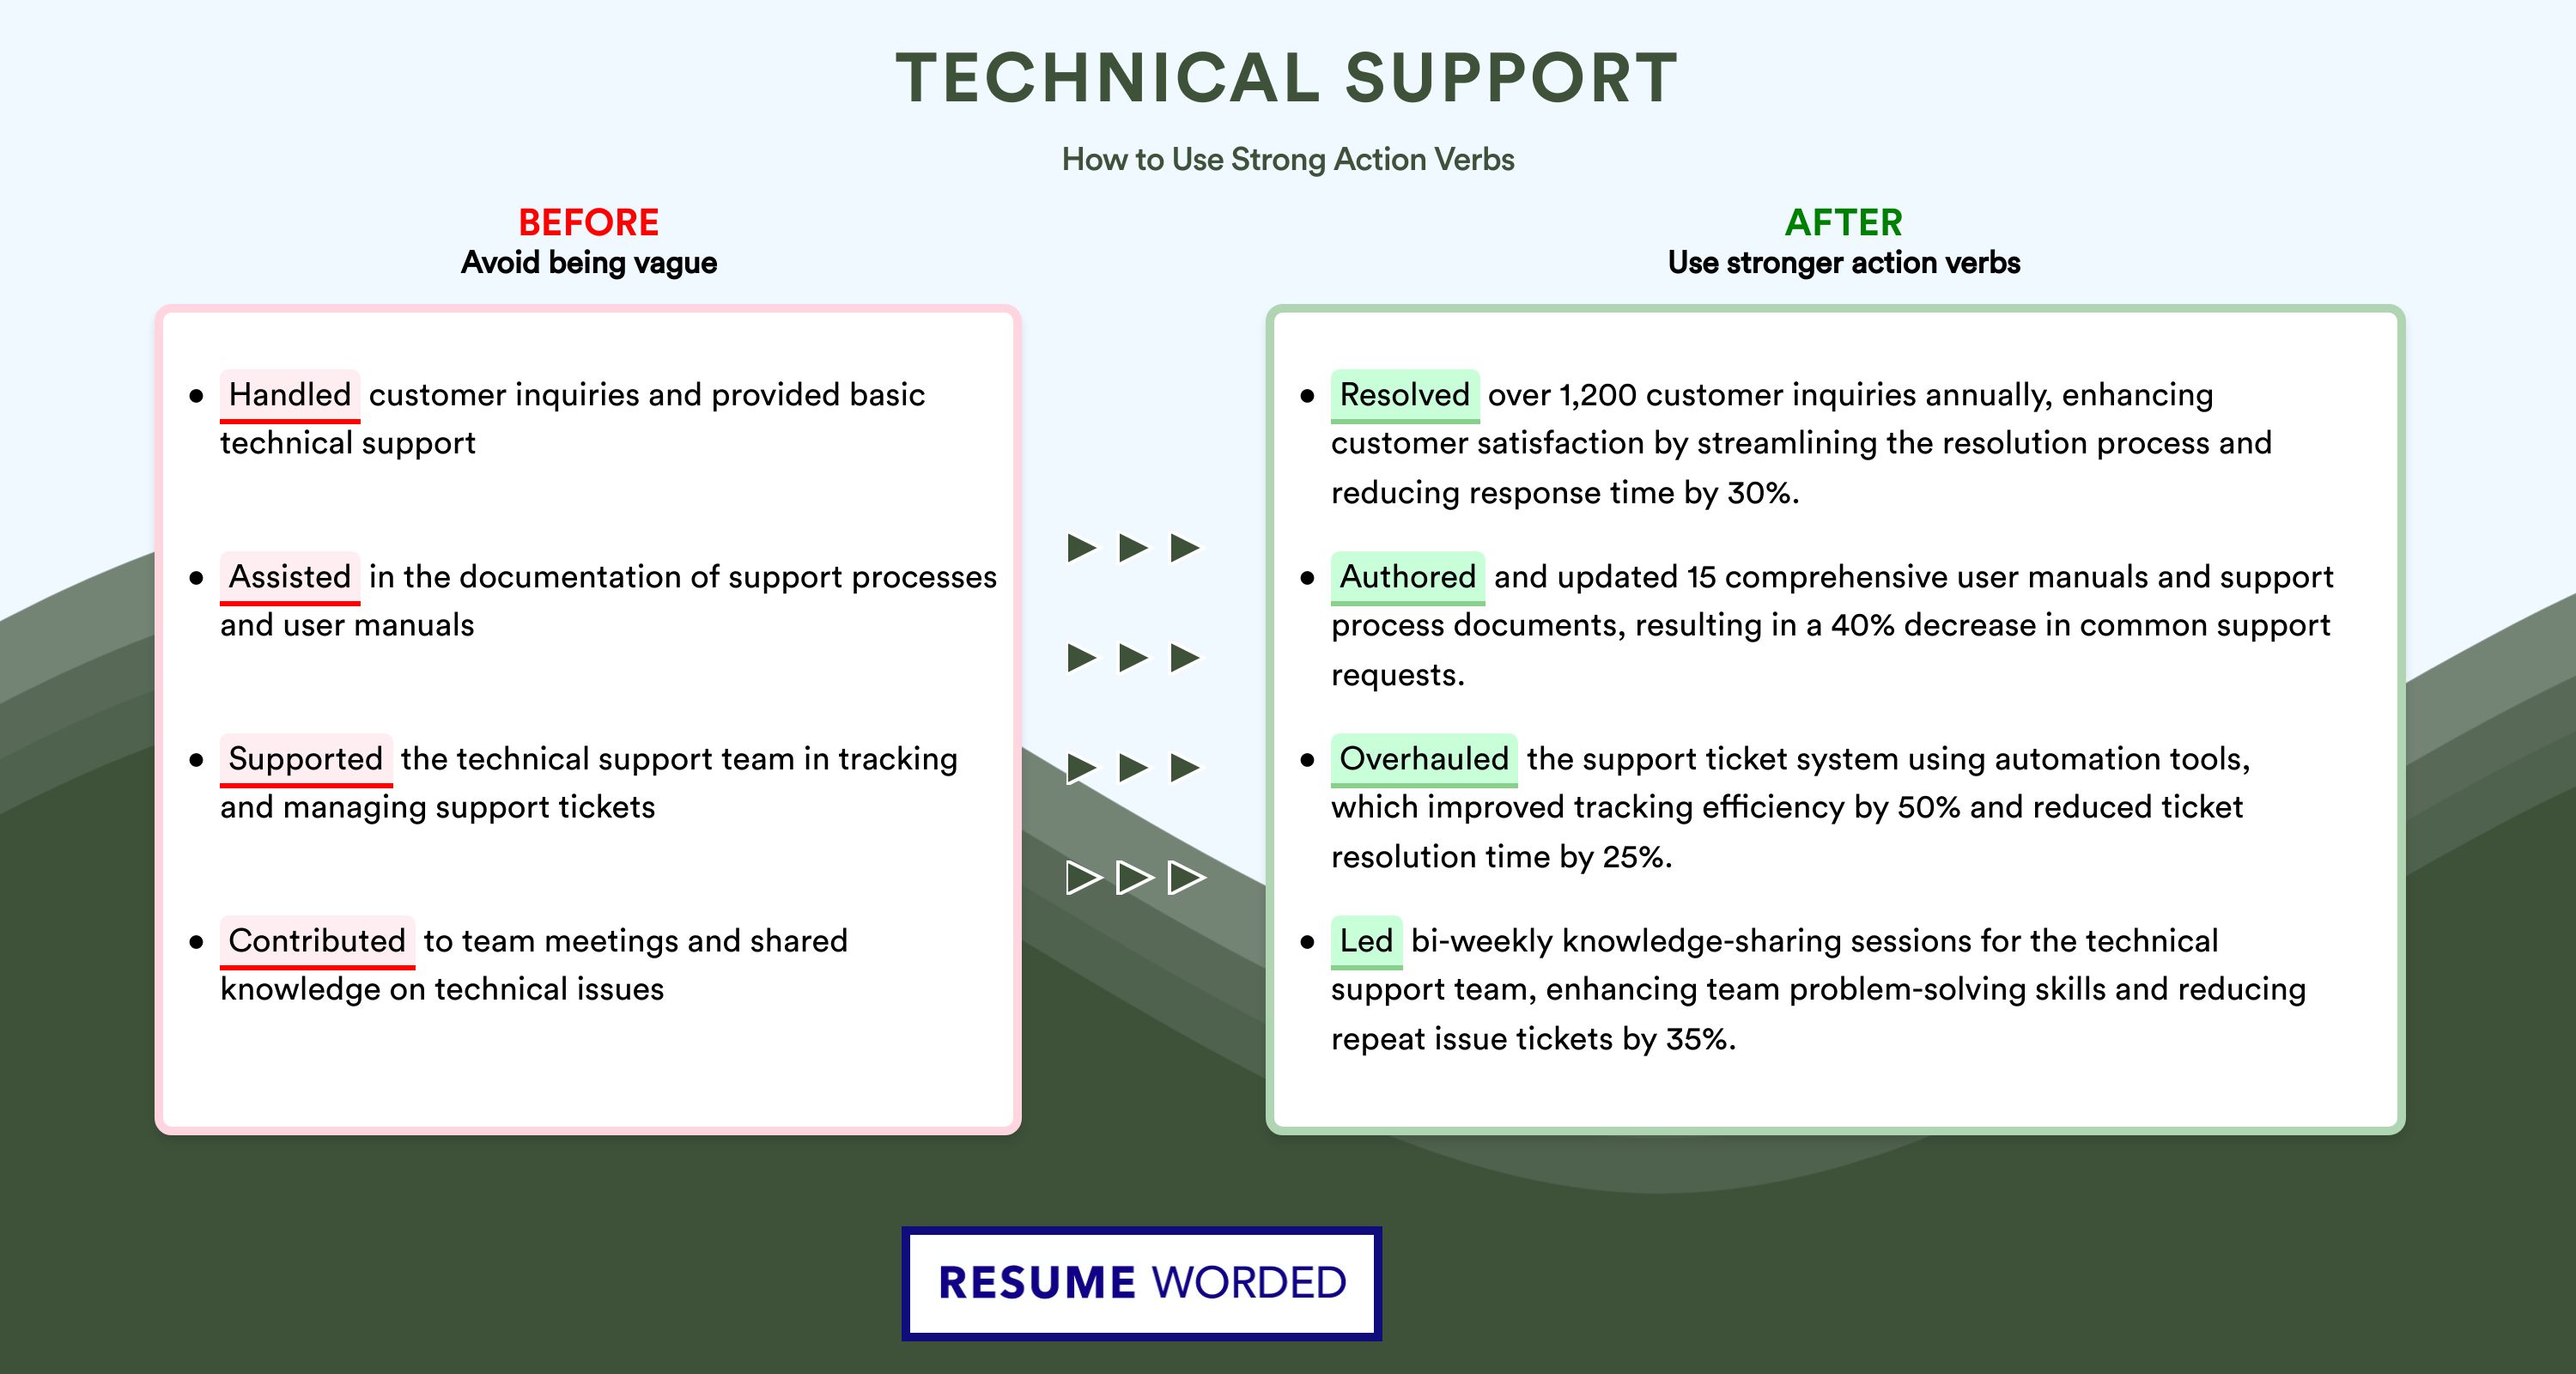 Action Verbs for Technical Support